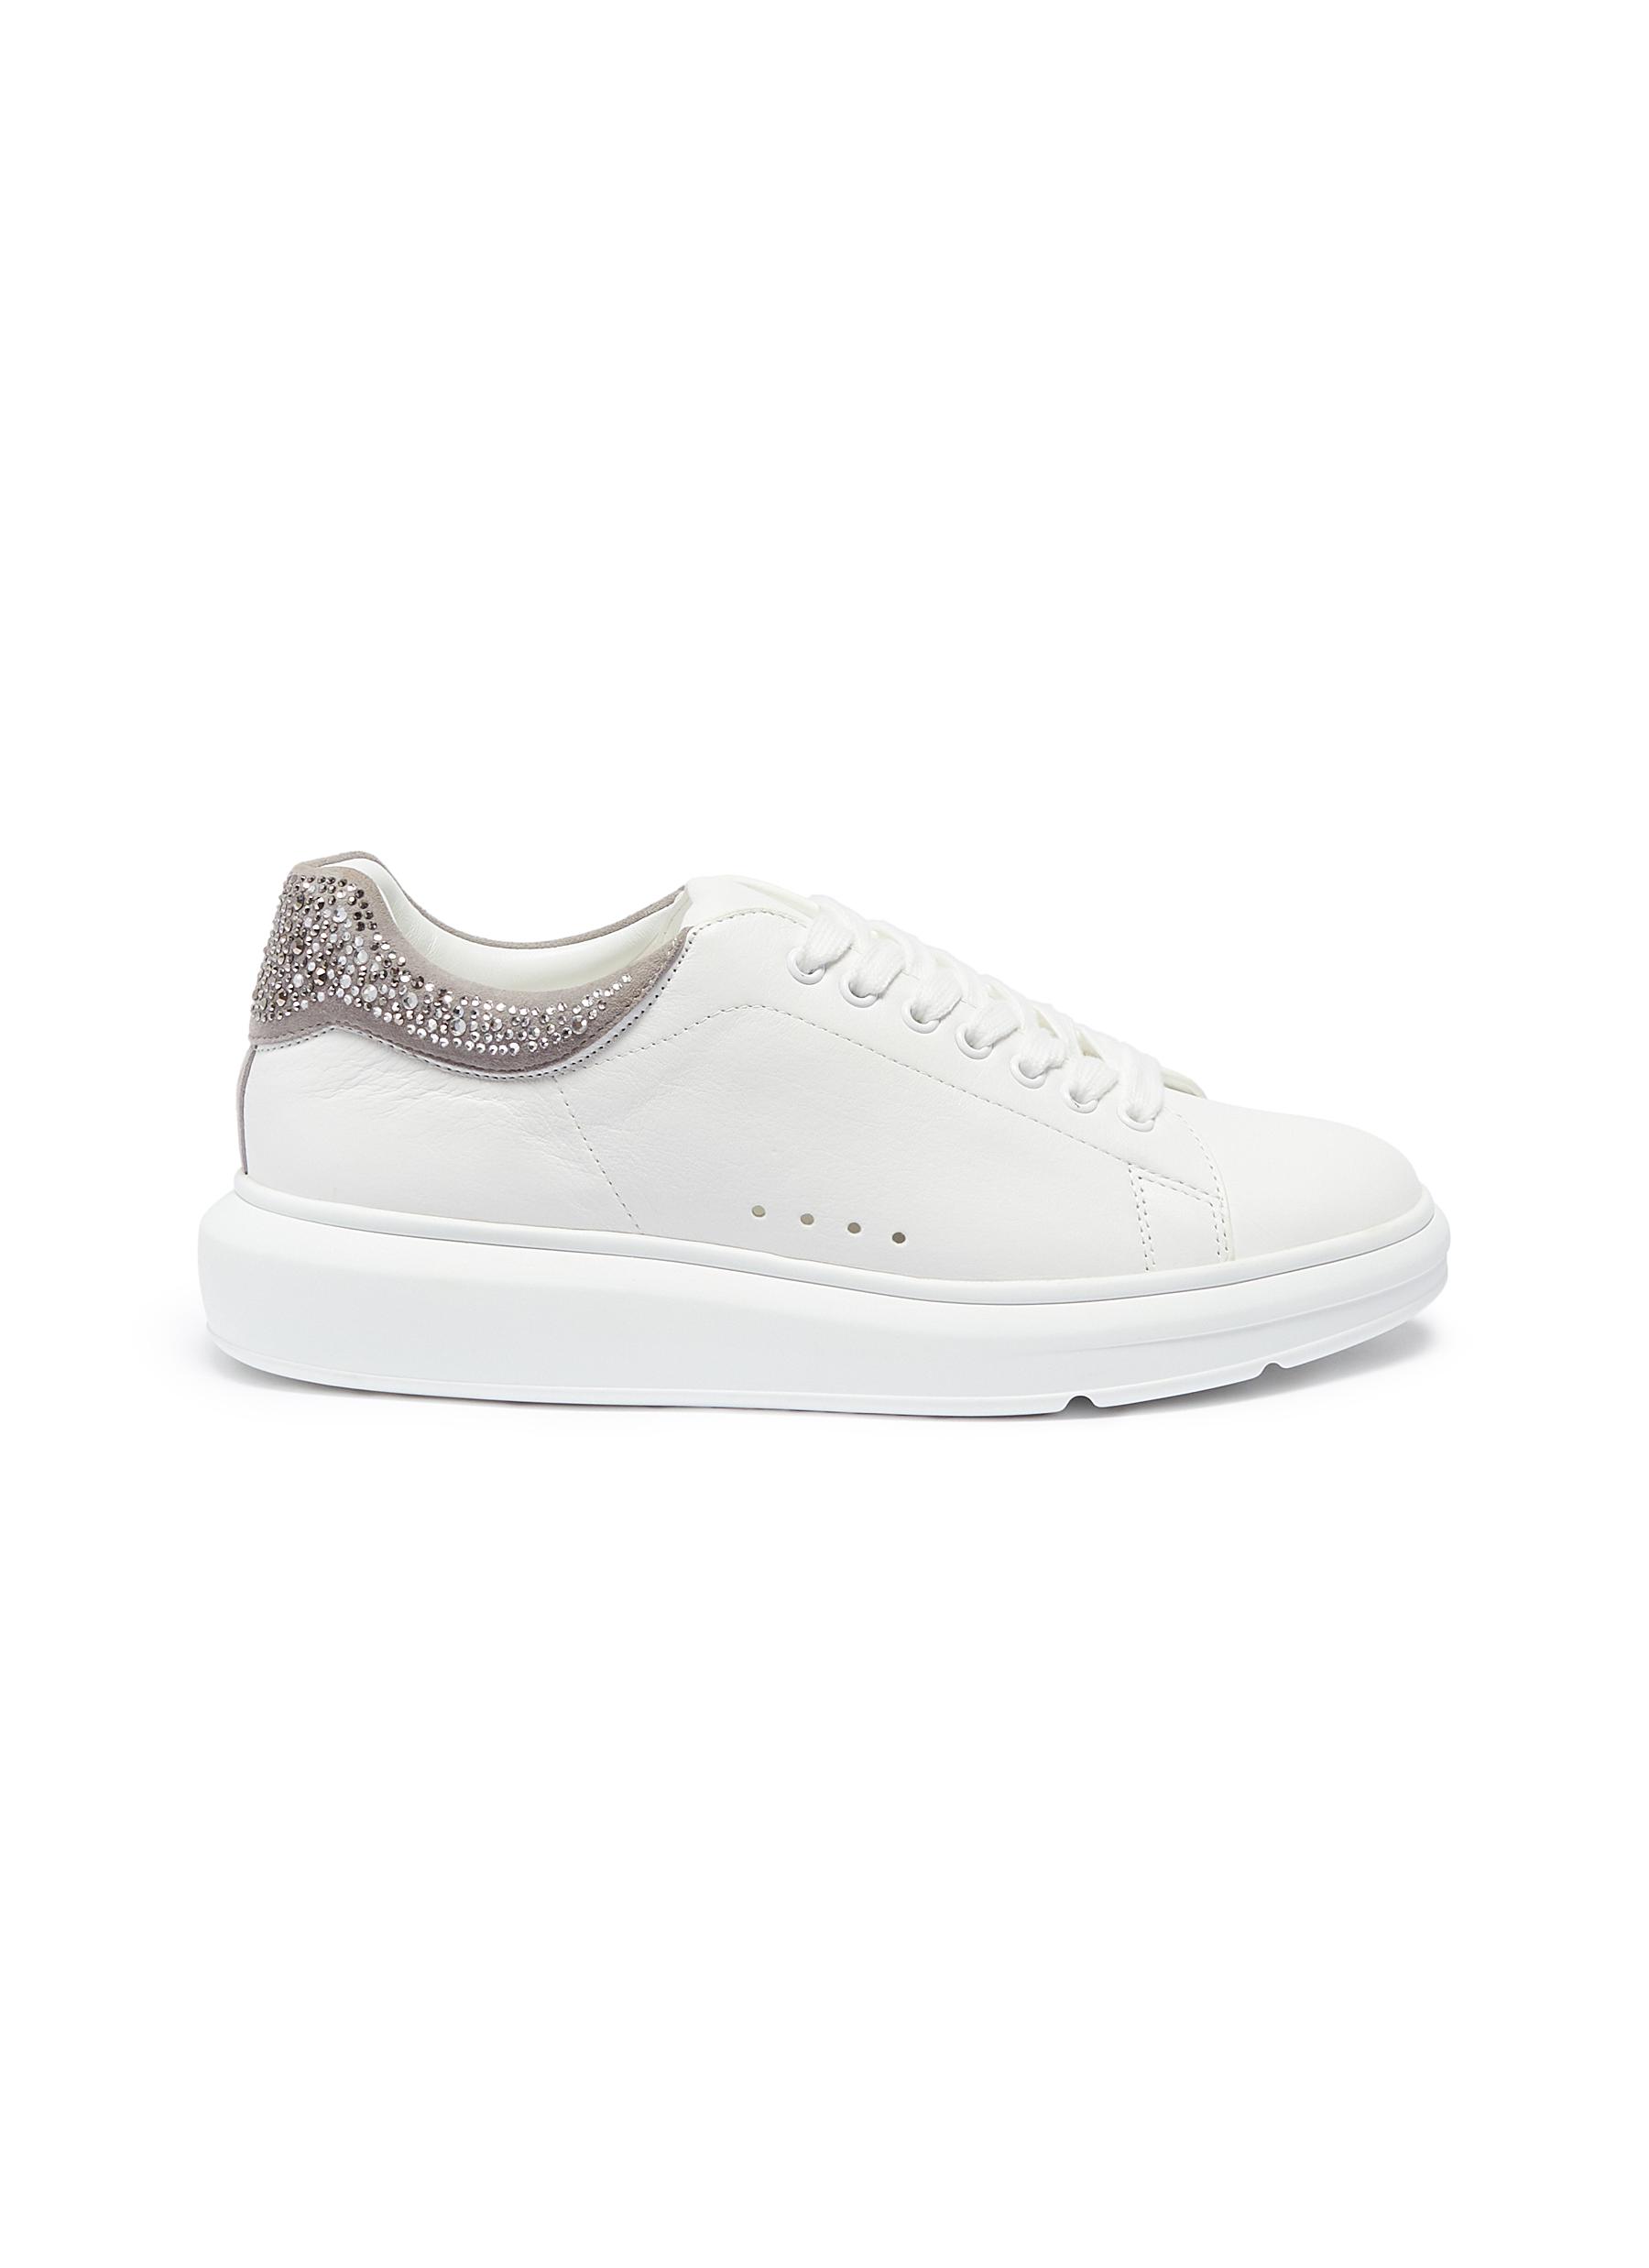 Louie strass collar leather platform sneakers by Pedder Red